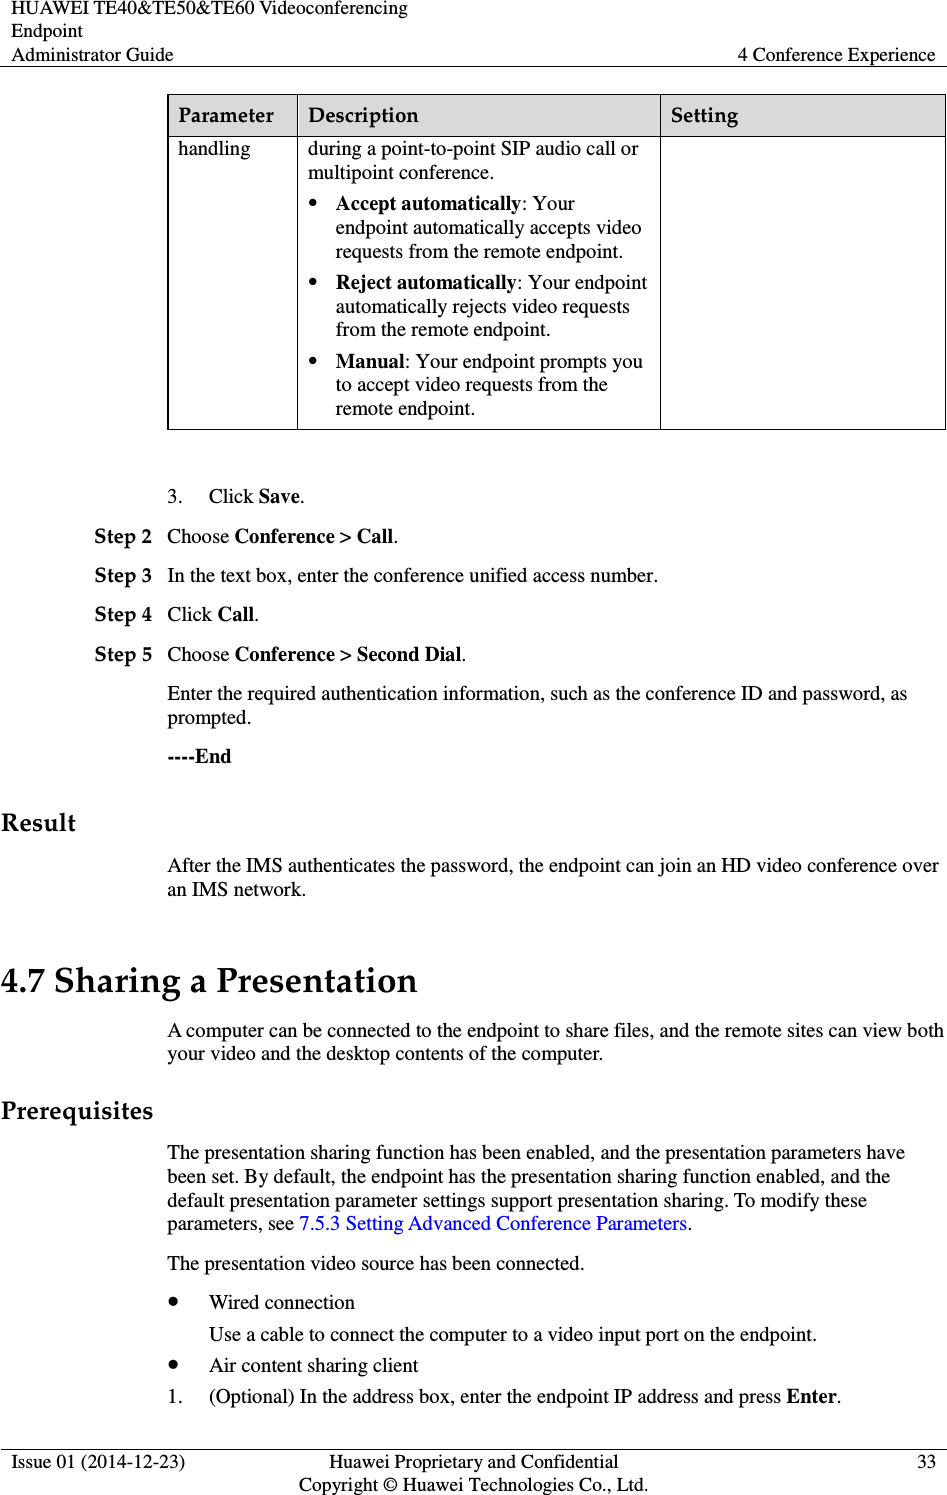 HUAWEI TE40&amp;TE50&amp;TE60 Videoconferencing Endpoint Administrator Guide  4 Conference Experience  Issue 01 (2014-12-23)  Huawei Proprietary and Confidential                                     Copyright © Huawei Technologies Co., Ltd. 33  Parameter  Description  Setting handling  during a point-to-point SIP audio call or multipoint conference.    Accept automatically: Your endpoint automatically accepts video requests from the remote endpoint.    Reject automatically: Your endpoint automatically rejects video requests from the remote endpoint.  Manual: Your endpoint prompts you to accept video requests from the remote endpoint.  3. Click Save. Step 2 Choose Conference &gt; Call. Step 3 In the text box, enter the conference unified access number. Step 4 Click Call. Step 5 Choose Conference &gt; Second Dial. Enter the required authentication information, such as the conference ID and password, as prompted.   ----End Result After the IMS authenticates the password, the endpoint can join an HD video conference over an IMS network. 4.7 Sharing a Presentation A computer can be connected to the endpoint to share files, and the remote sites can view both your video and the desktop contents of the computer. Prerequisites The presentation sharing function has been enabled, and the presentation parameters have been set. By default, the endpoint has the presentation sharing function enabled, and the default presentation parameter settings support presentation sharing. To modify these parameters, see 7.5.3 Setting Advanced Conference Parameters. The presentation video source has been connected.  Wired connection Use a cable to connect the computer to a video input port on the endpoint.  Air content sharing client 1. (Optional) In the address box, enter the endpoint IP address and press Enter. 